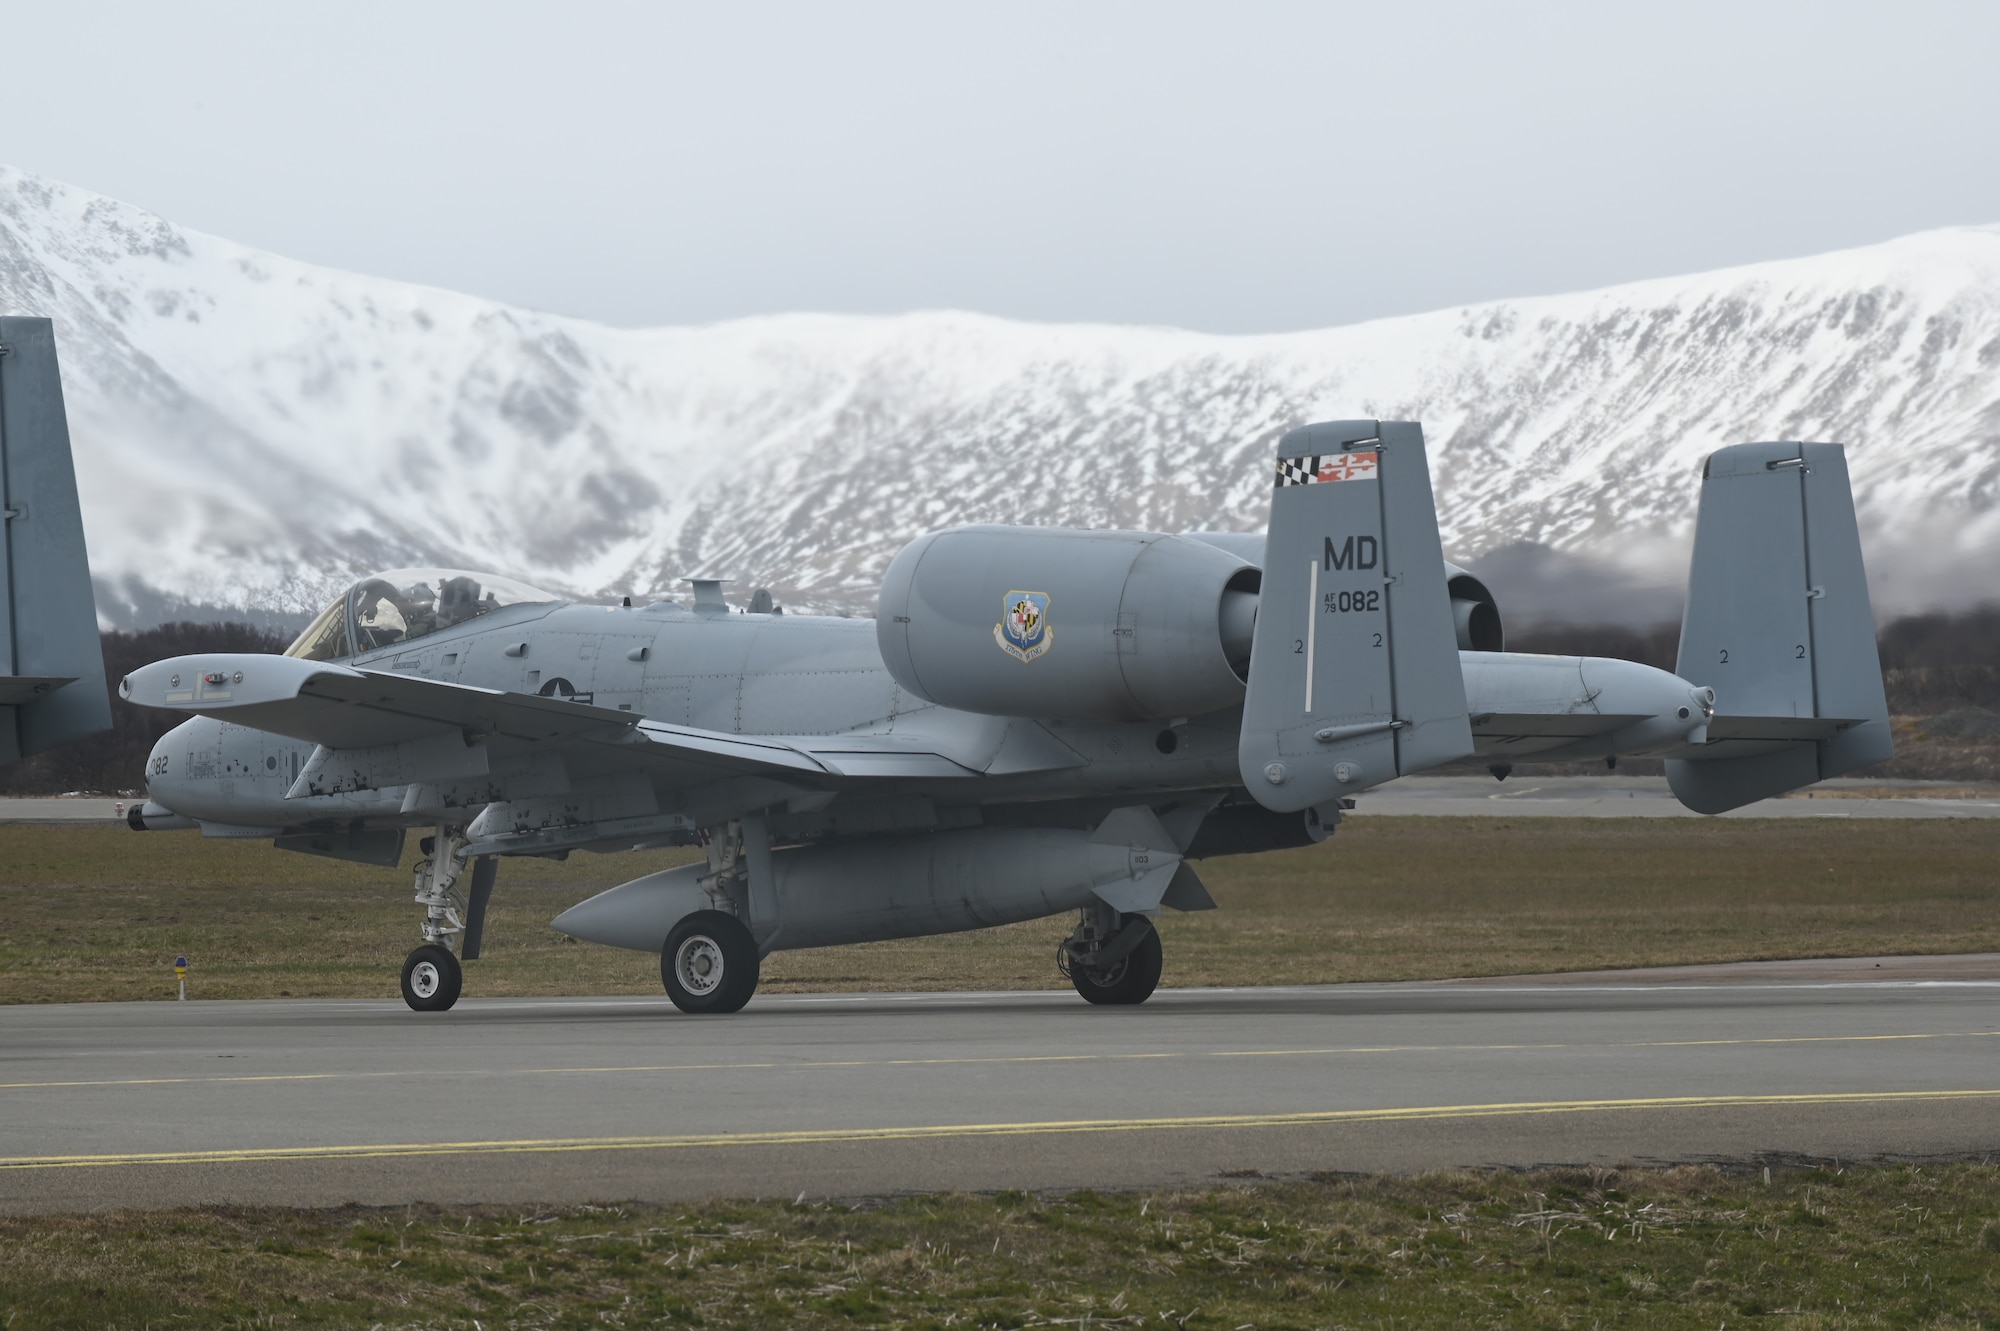 An A10-C Thunderbolt II aircraft assigned to the 104th Fighter Squadron, Maryland Air National Guard, prepares for takeoff from Andoya Air Base, heading to Setermoen Range to participate in the Swift Response exercise, May 9, 2022, in Andenes, Norway.